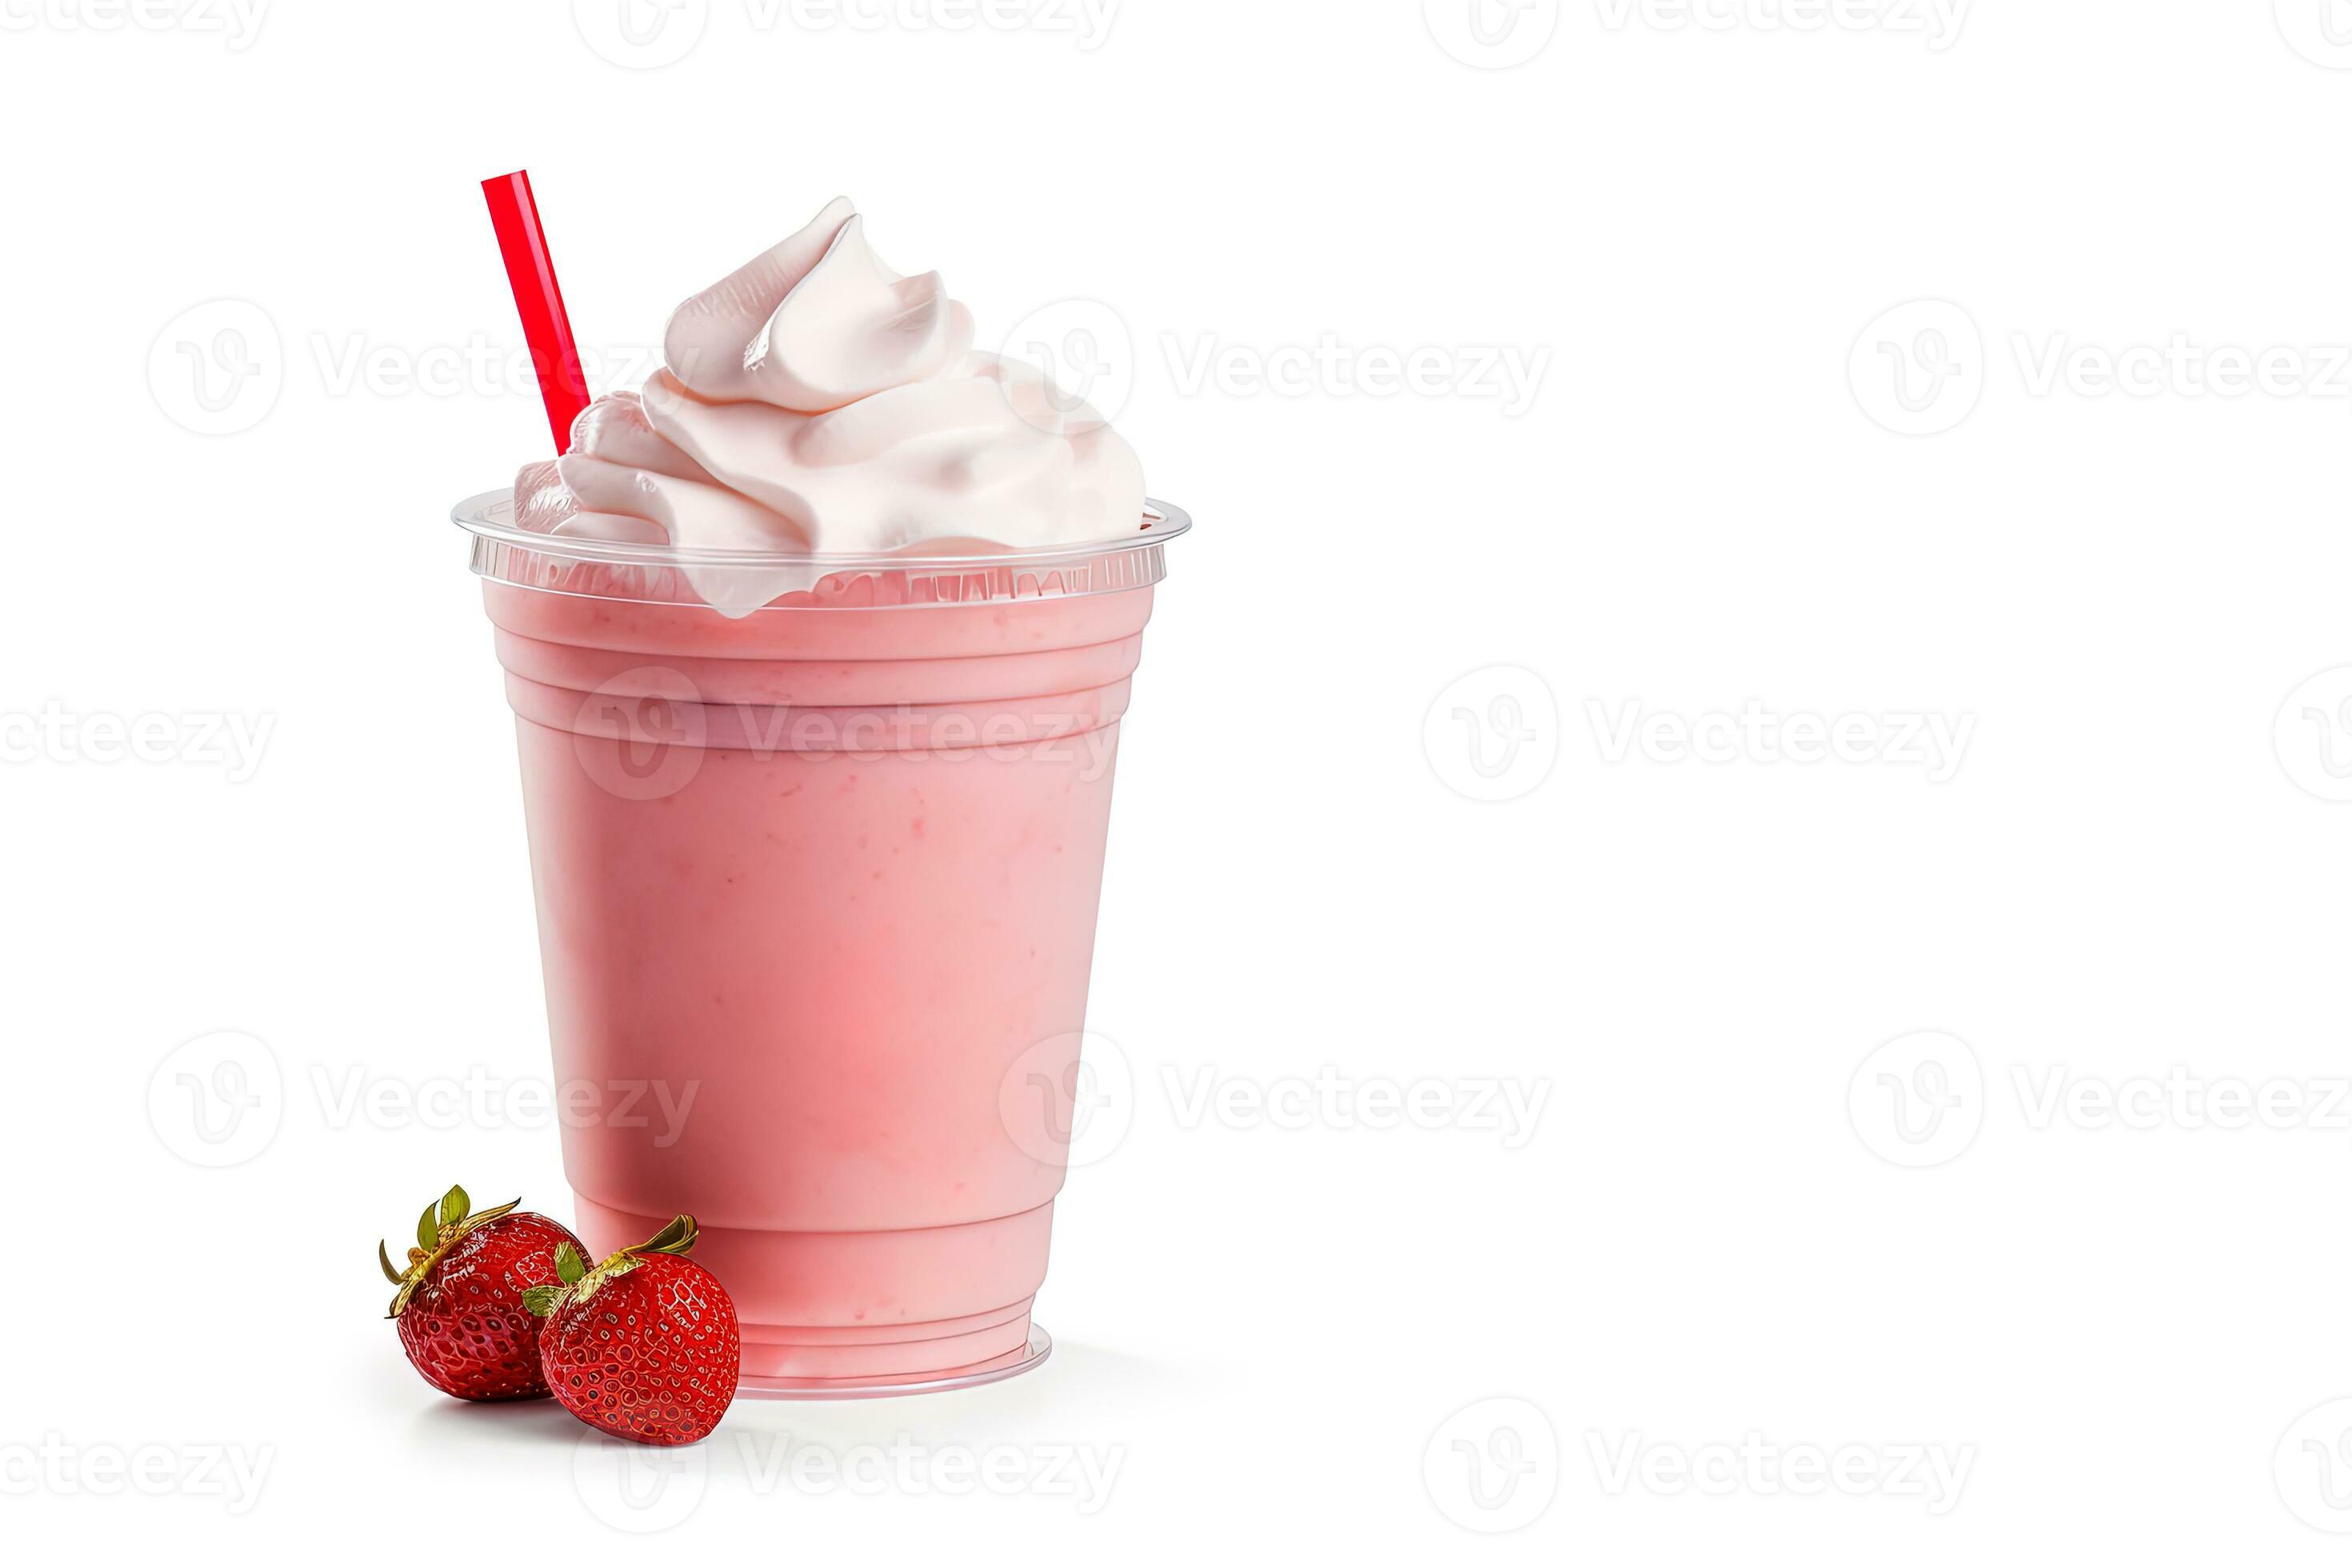 https://static.vecteezy.com/system/resources/previews/026/278/366/large_2x/strawberry-milkshake-in-plastic-takeaway-cup-isolated-on-white-background-with-copy-space-ai-generated-photo.jpg